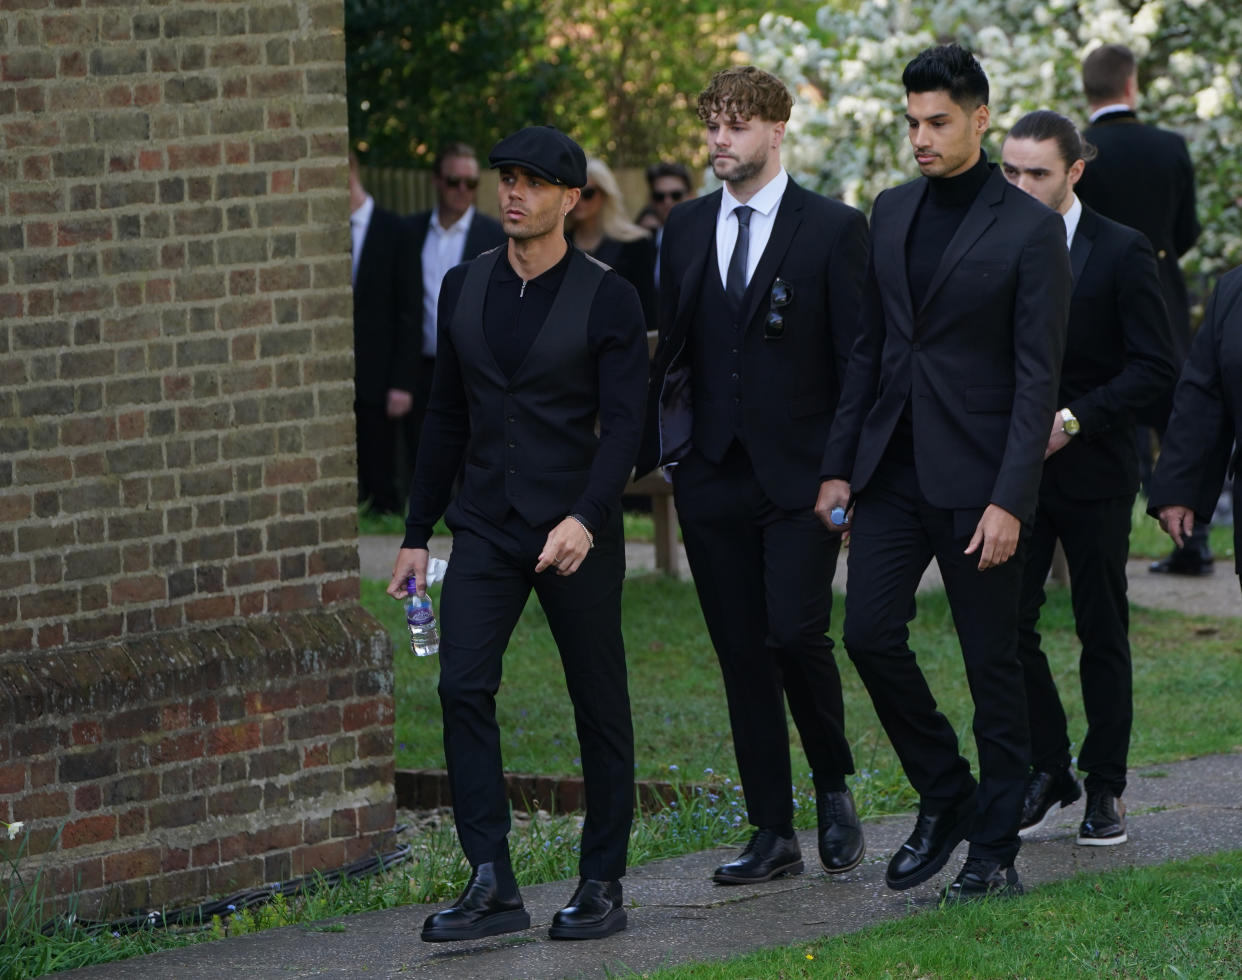 The Wanted's Max George, Jay McGuiness, Siva Kaneswaran and Nathan Sykes arriving at the funeral of bandmate Tom Parker. (Getty Images)